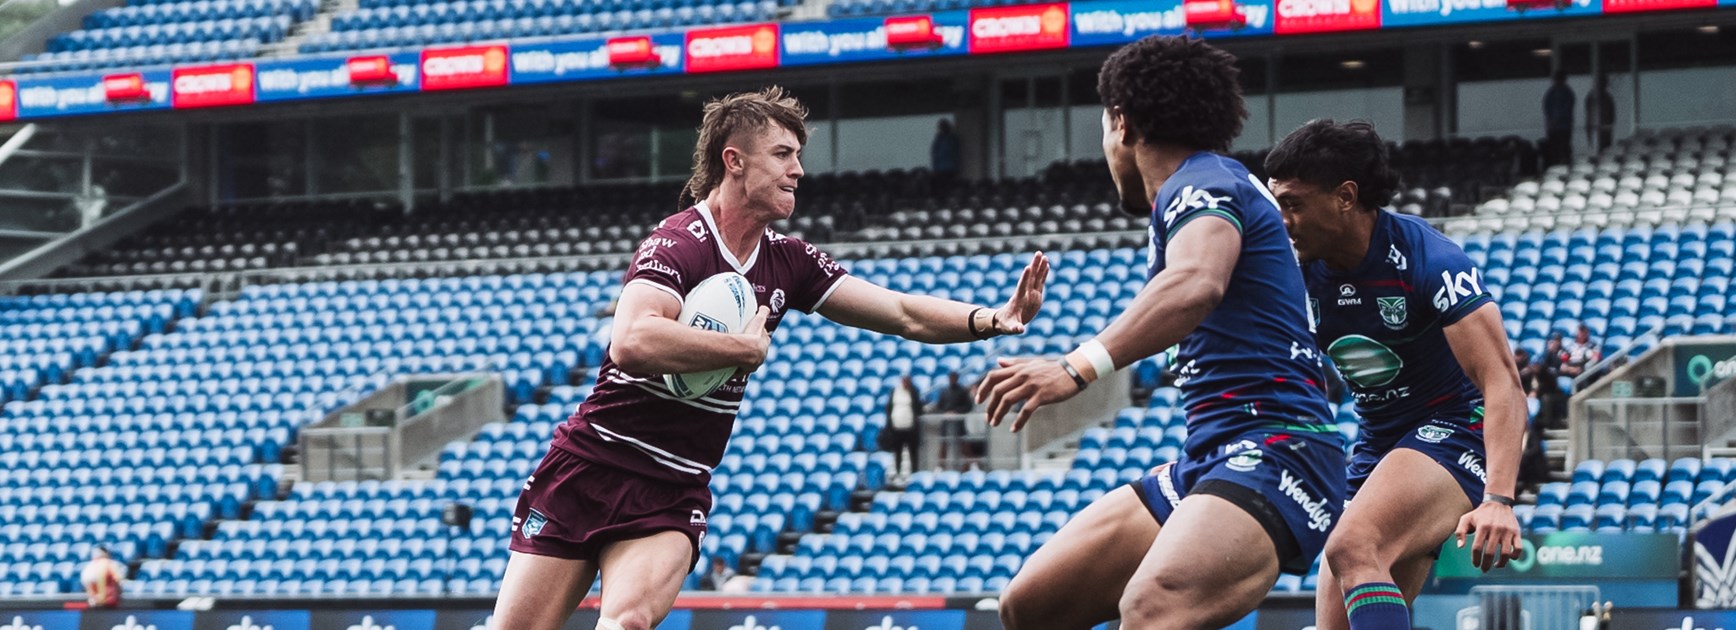 Centre Oliver Lawry fends off the Warriors in Auckland today